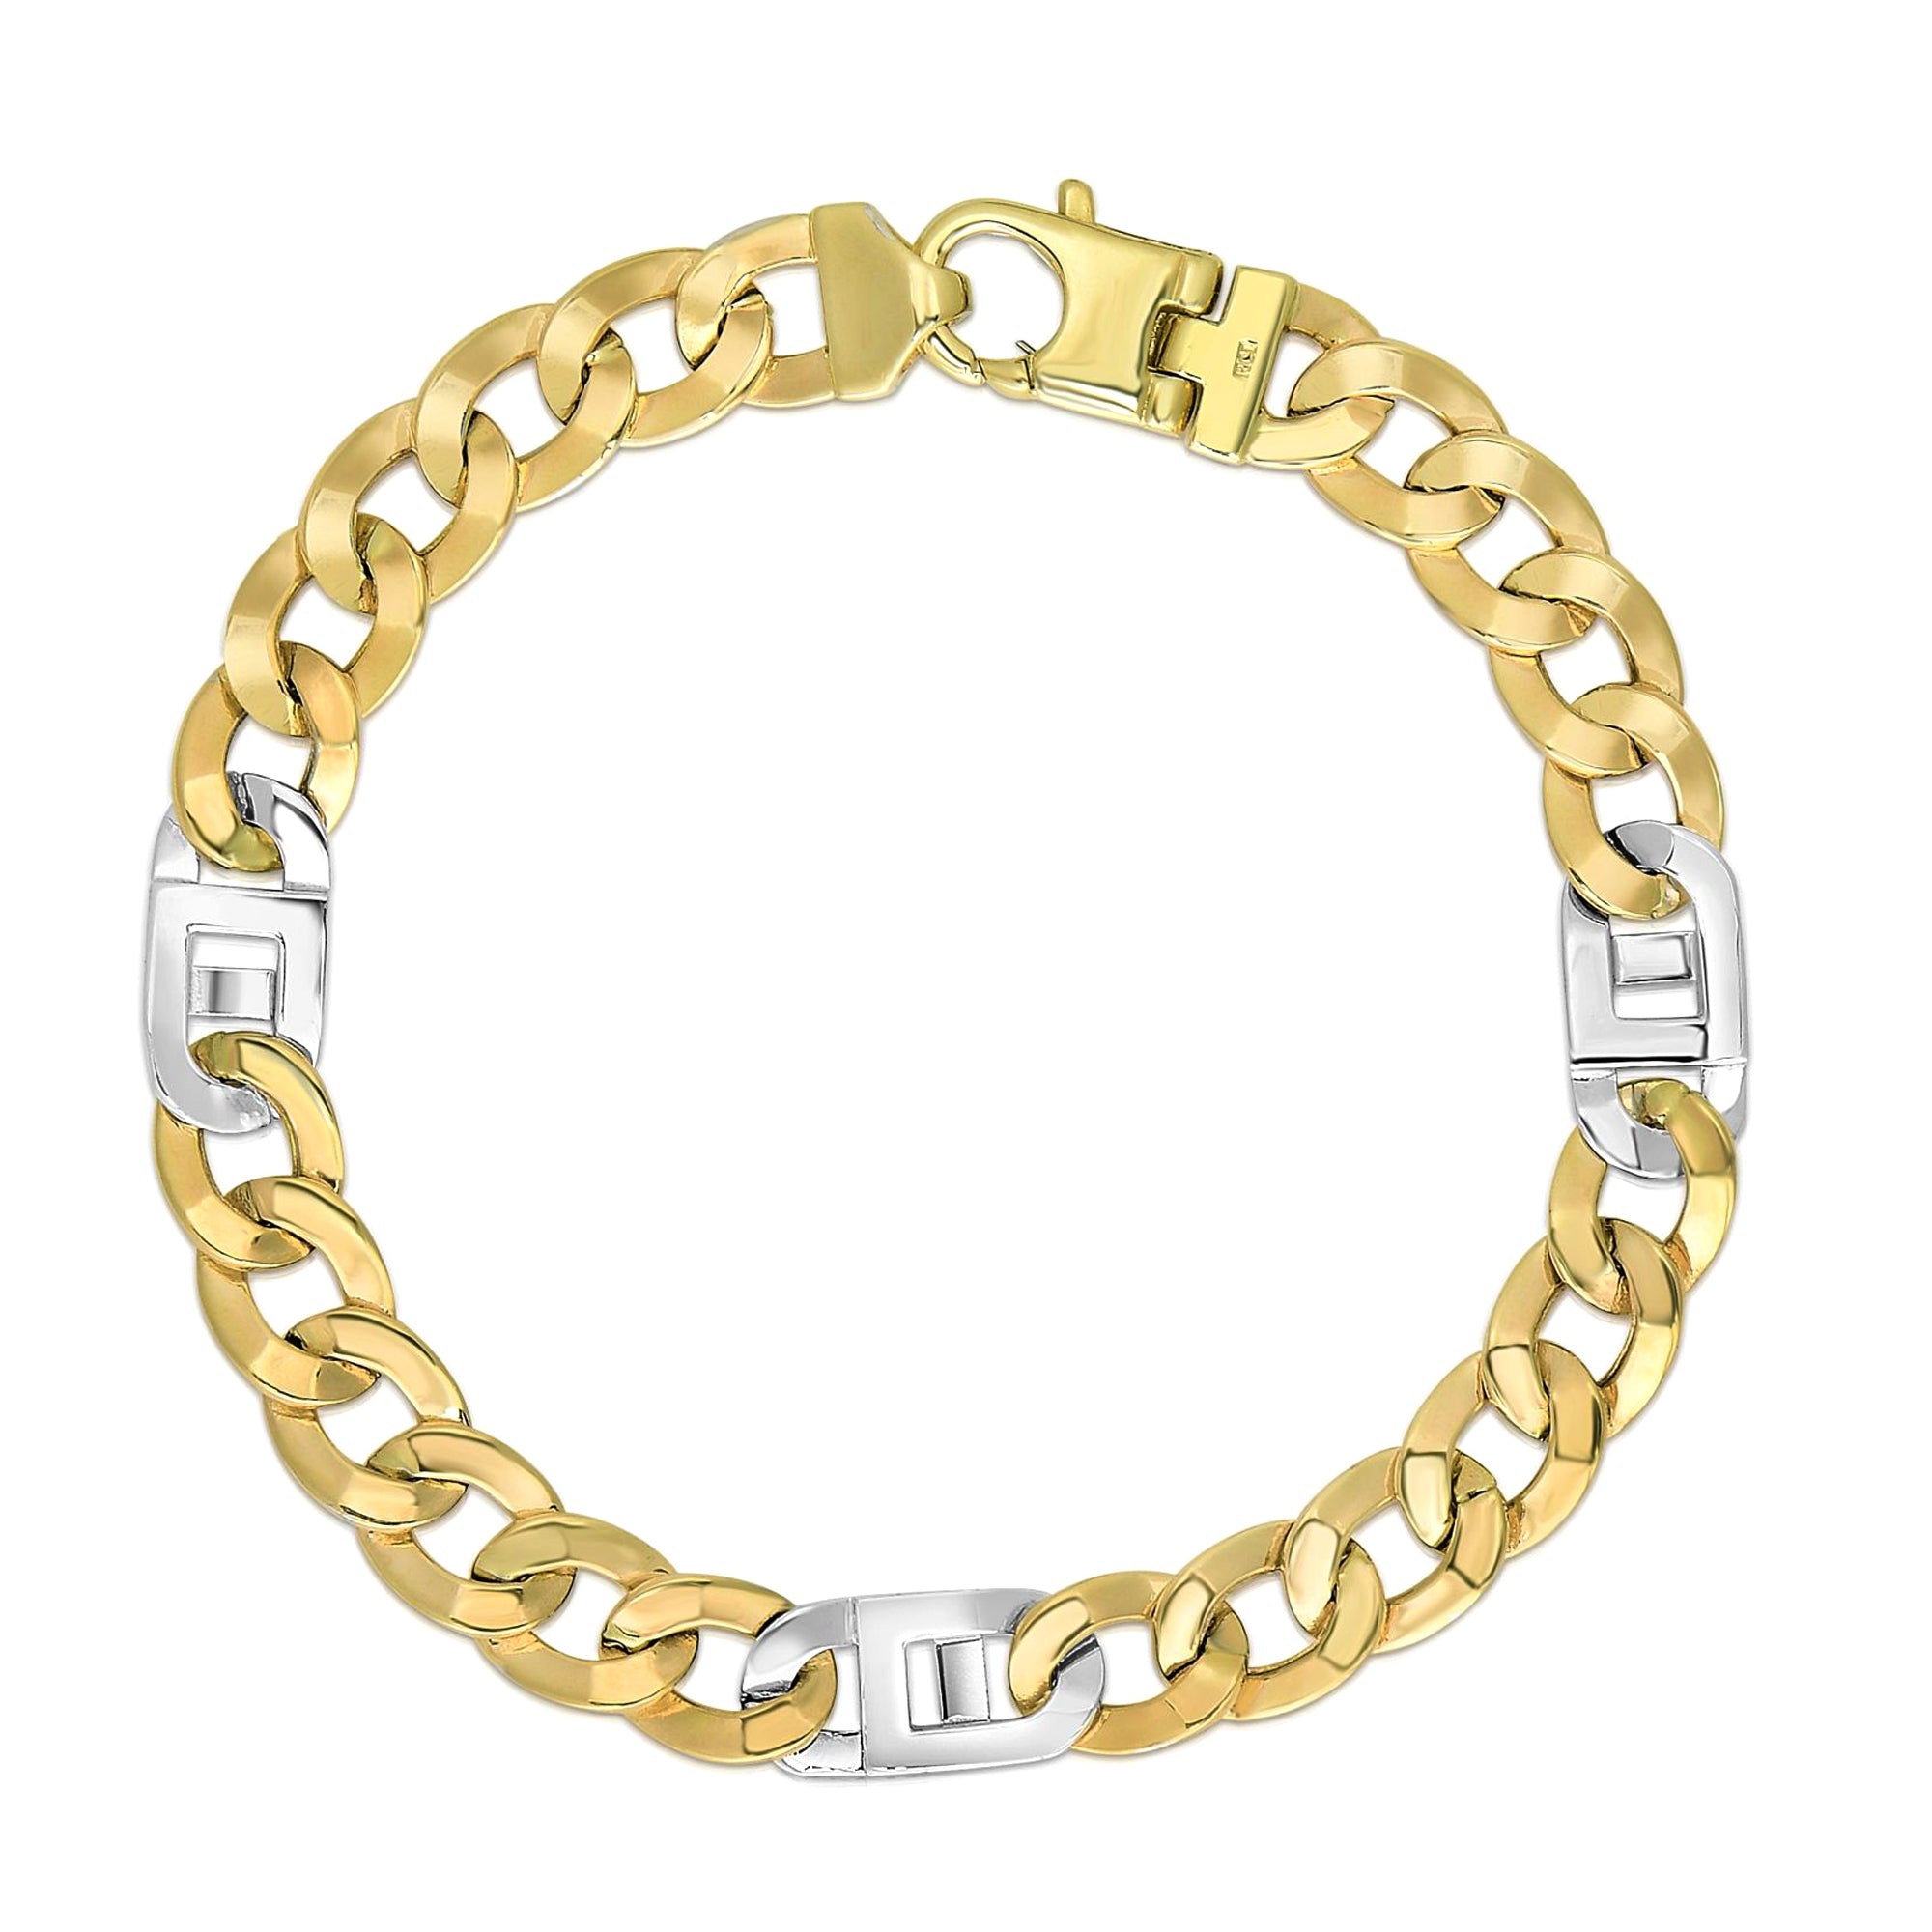 14k Yellow And White Gold Diamond Cut Curb Mariner Link Mens Bracelet, 8.5" fine designer jewelry for men and women